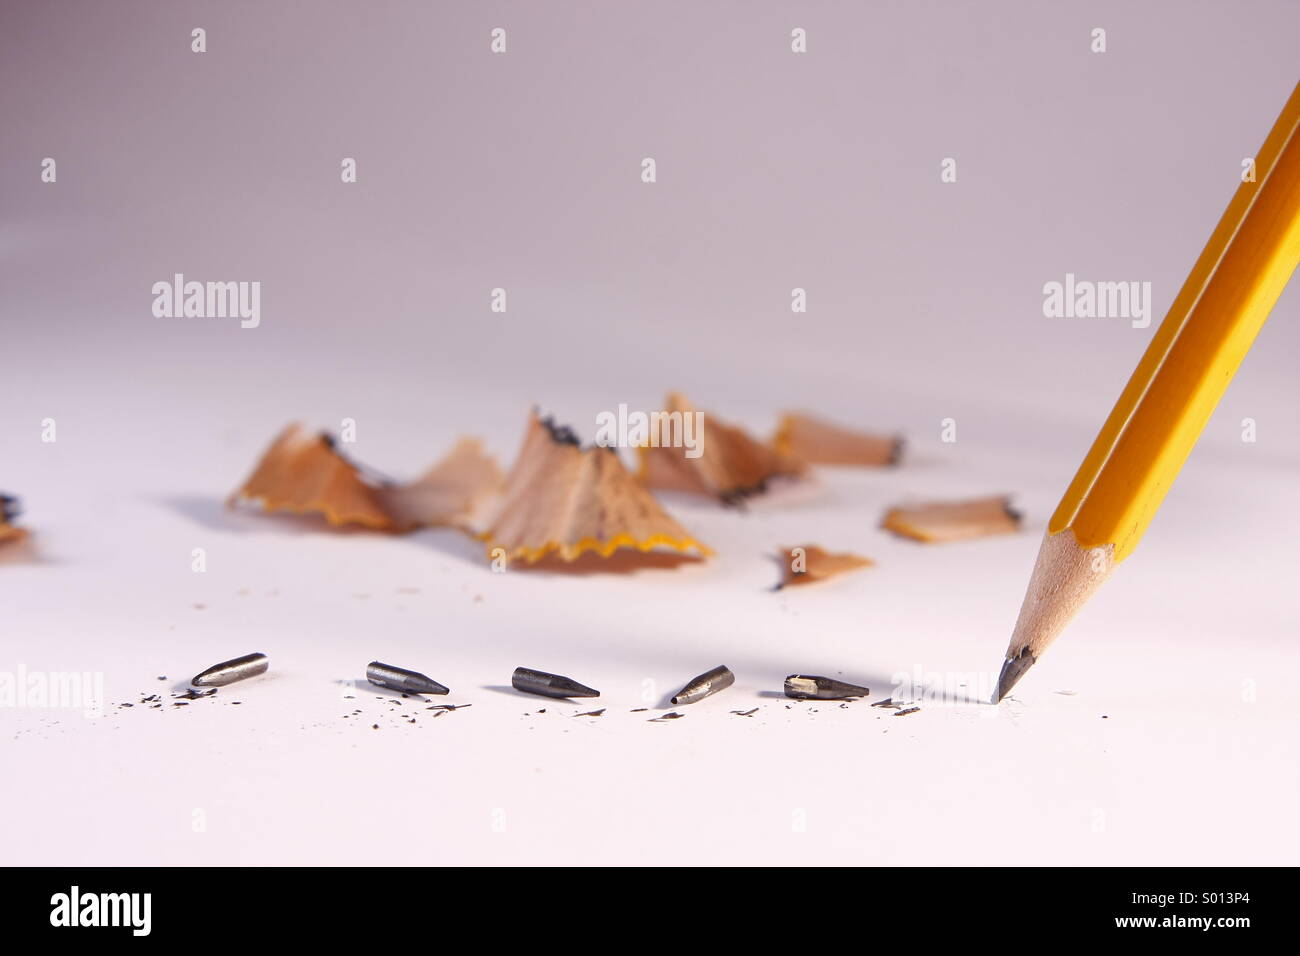 Pencil with broken lead tips and pencil shavings Stock Photo